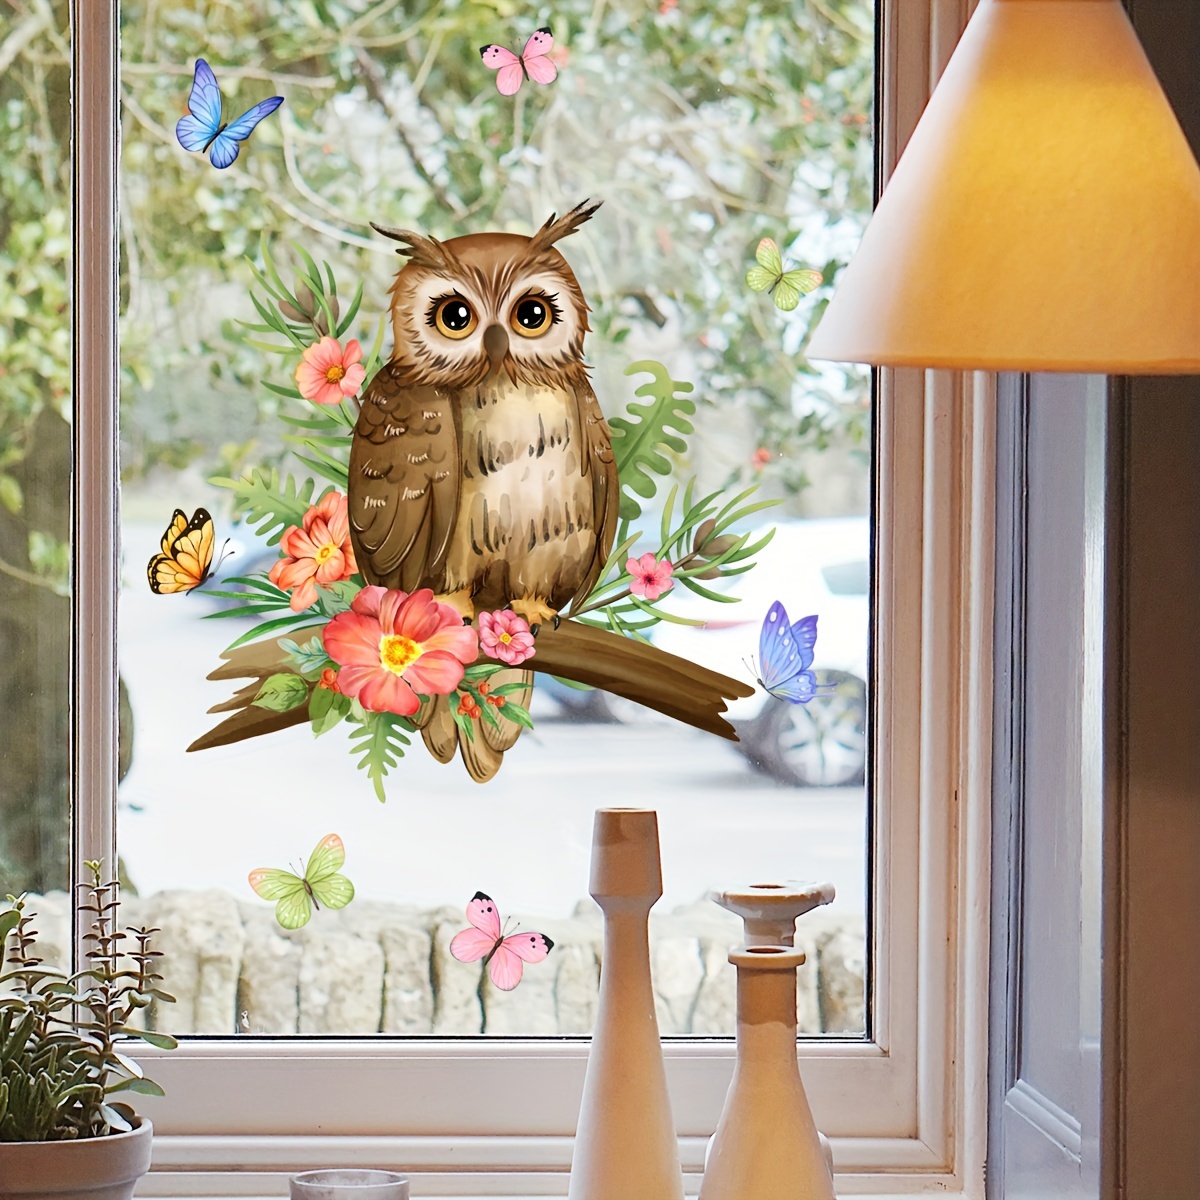 

1pc Owl Butterfly Floral Window Decal Home Decoration Sticker With Static Electricity, Creative Background, Self-adhesive And Removable Pvc Atmosphere Beautification Sticker